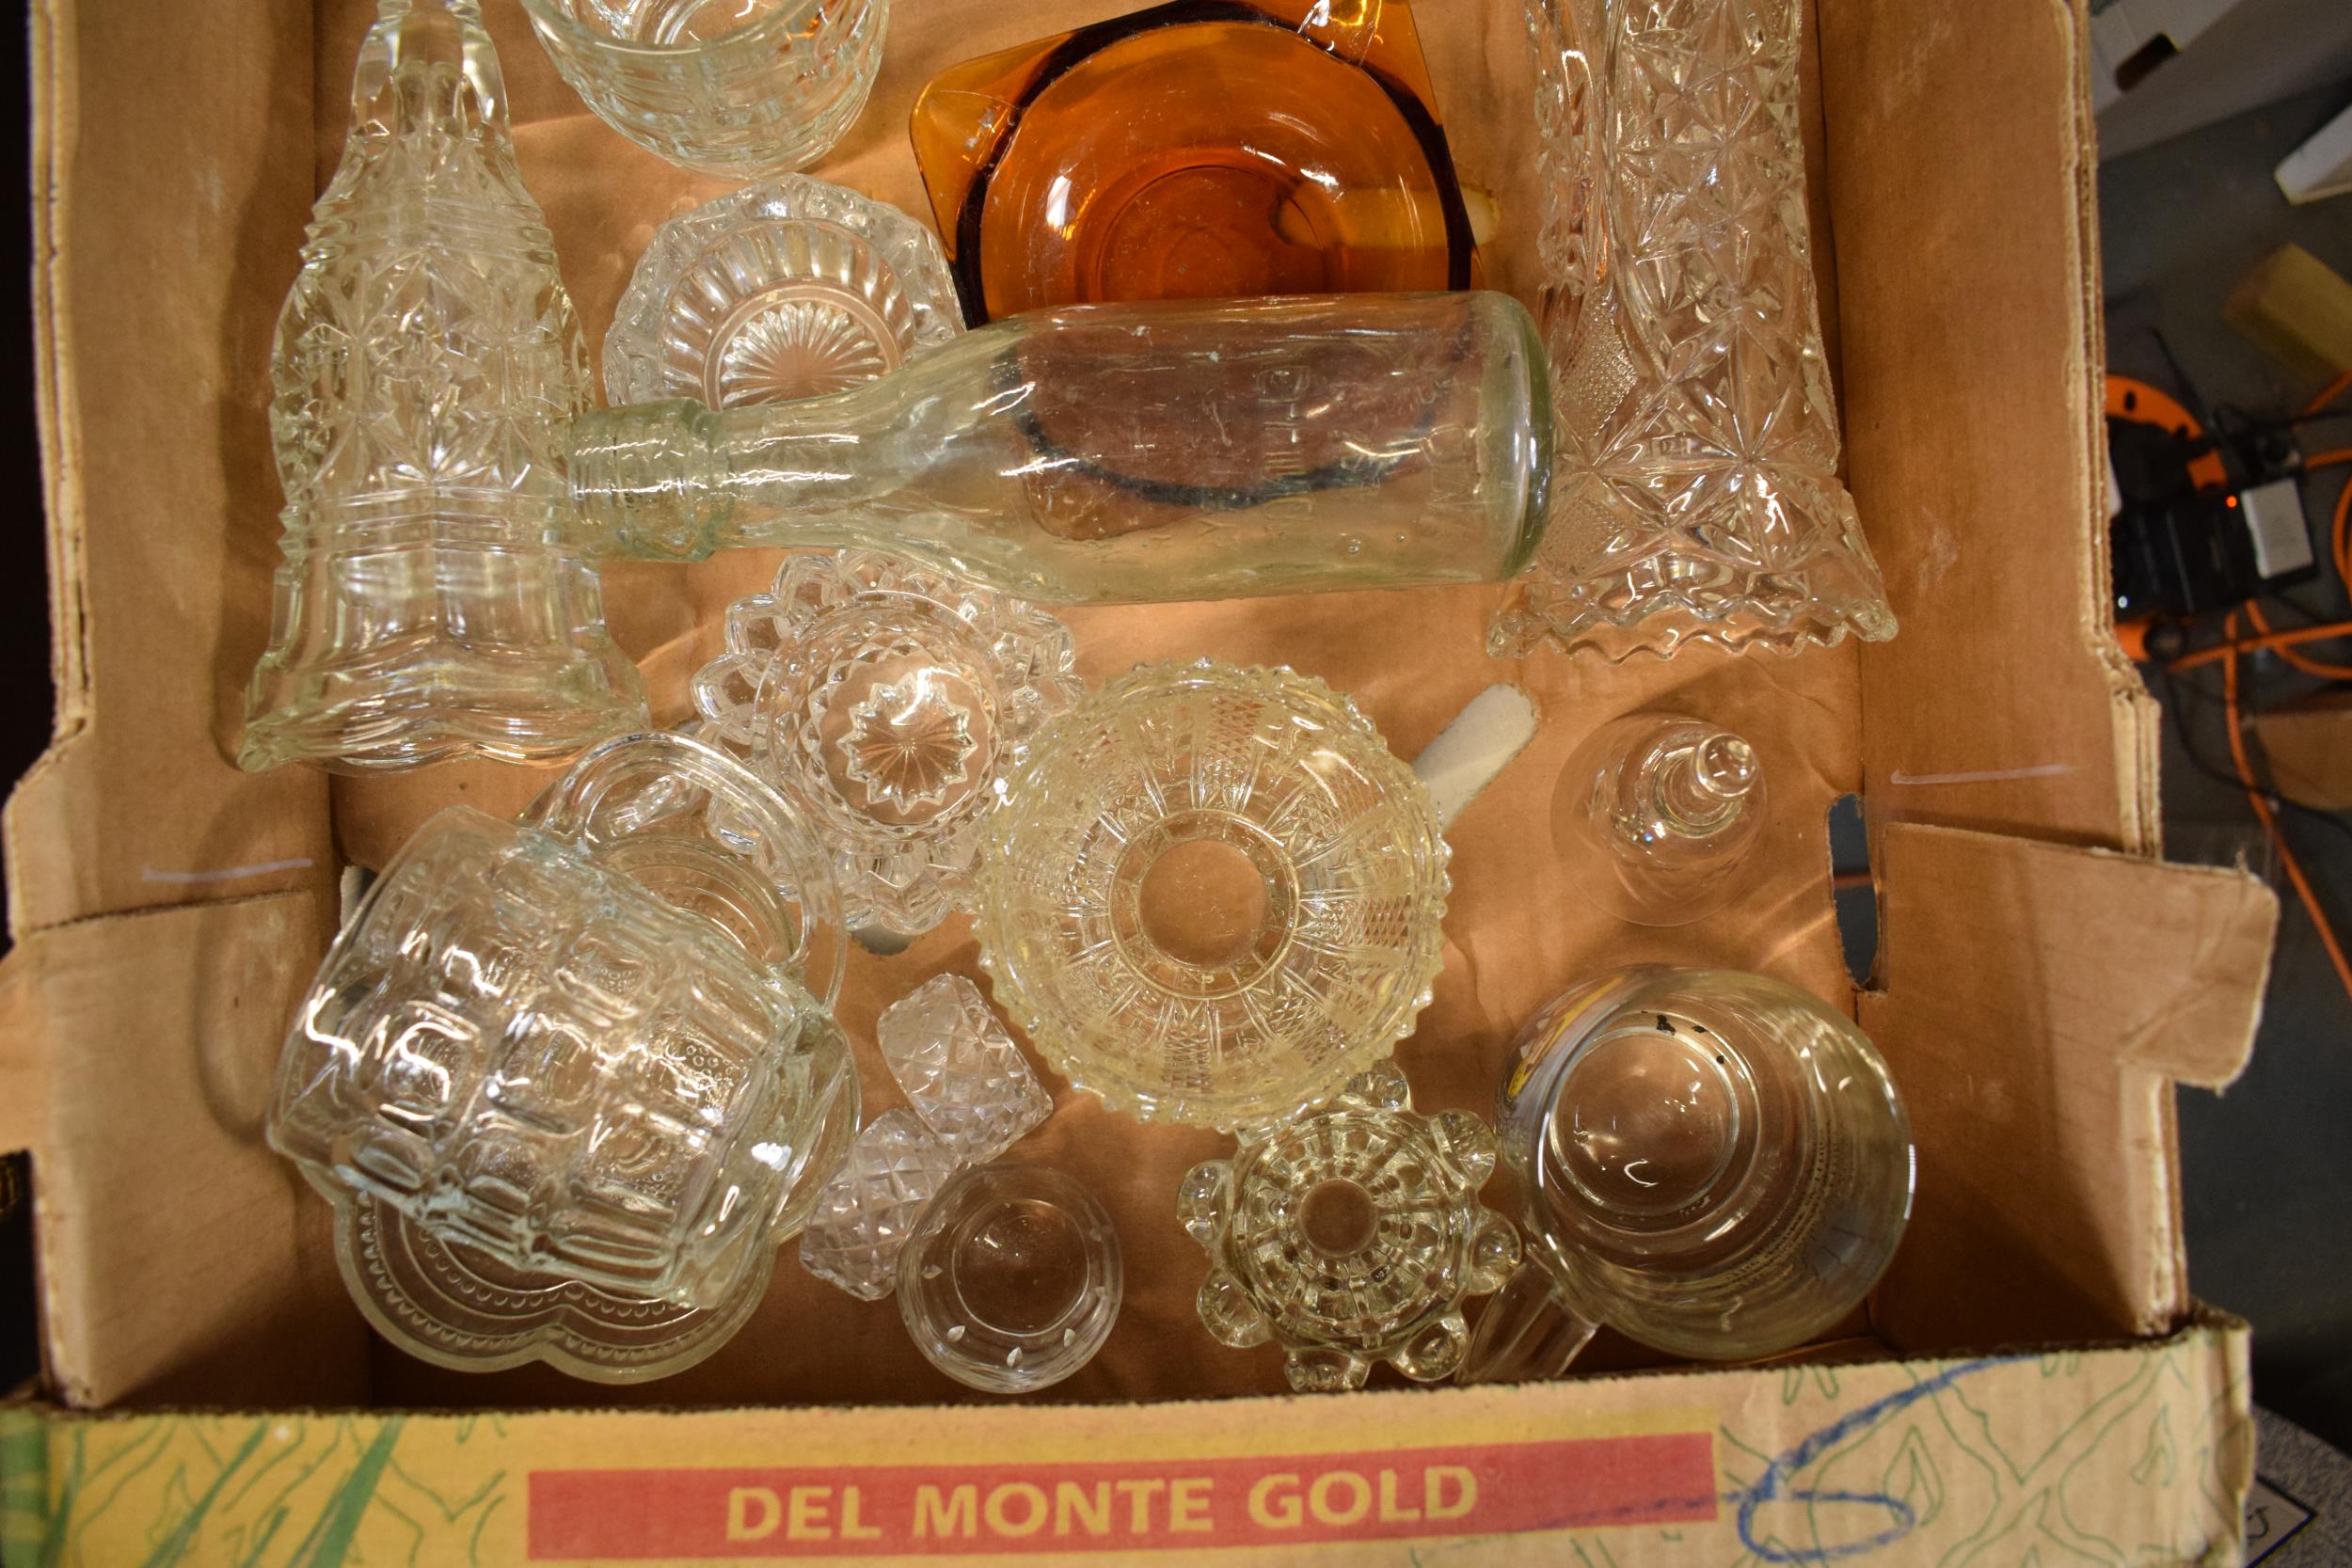 A collection of 20th century glass ware to include cut glass, pressed examples such as vases, - Image 3 of 3